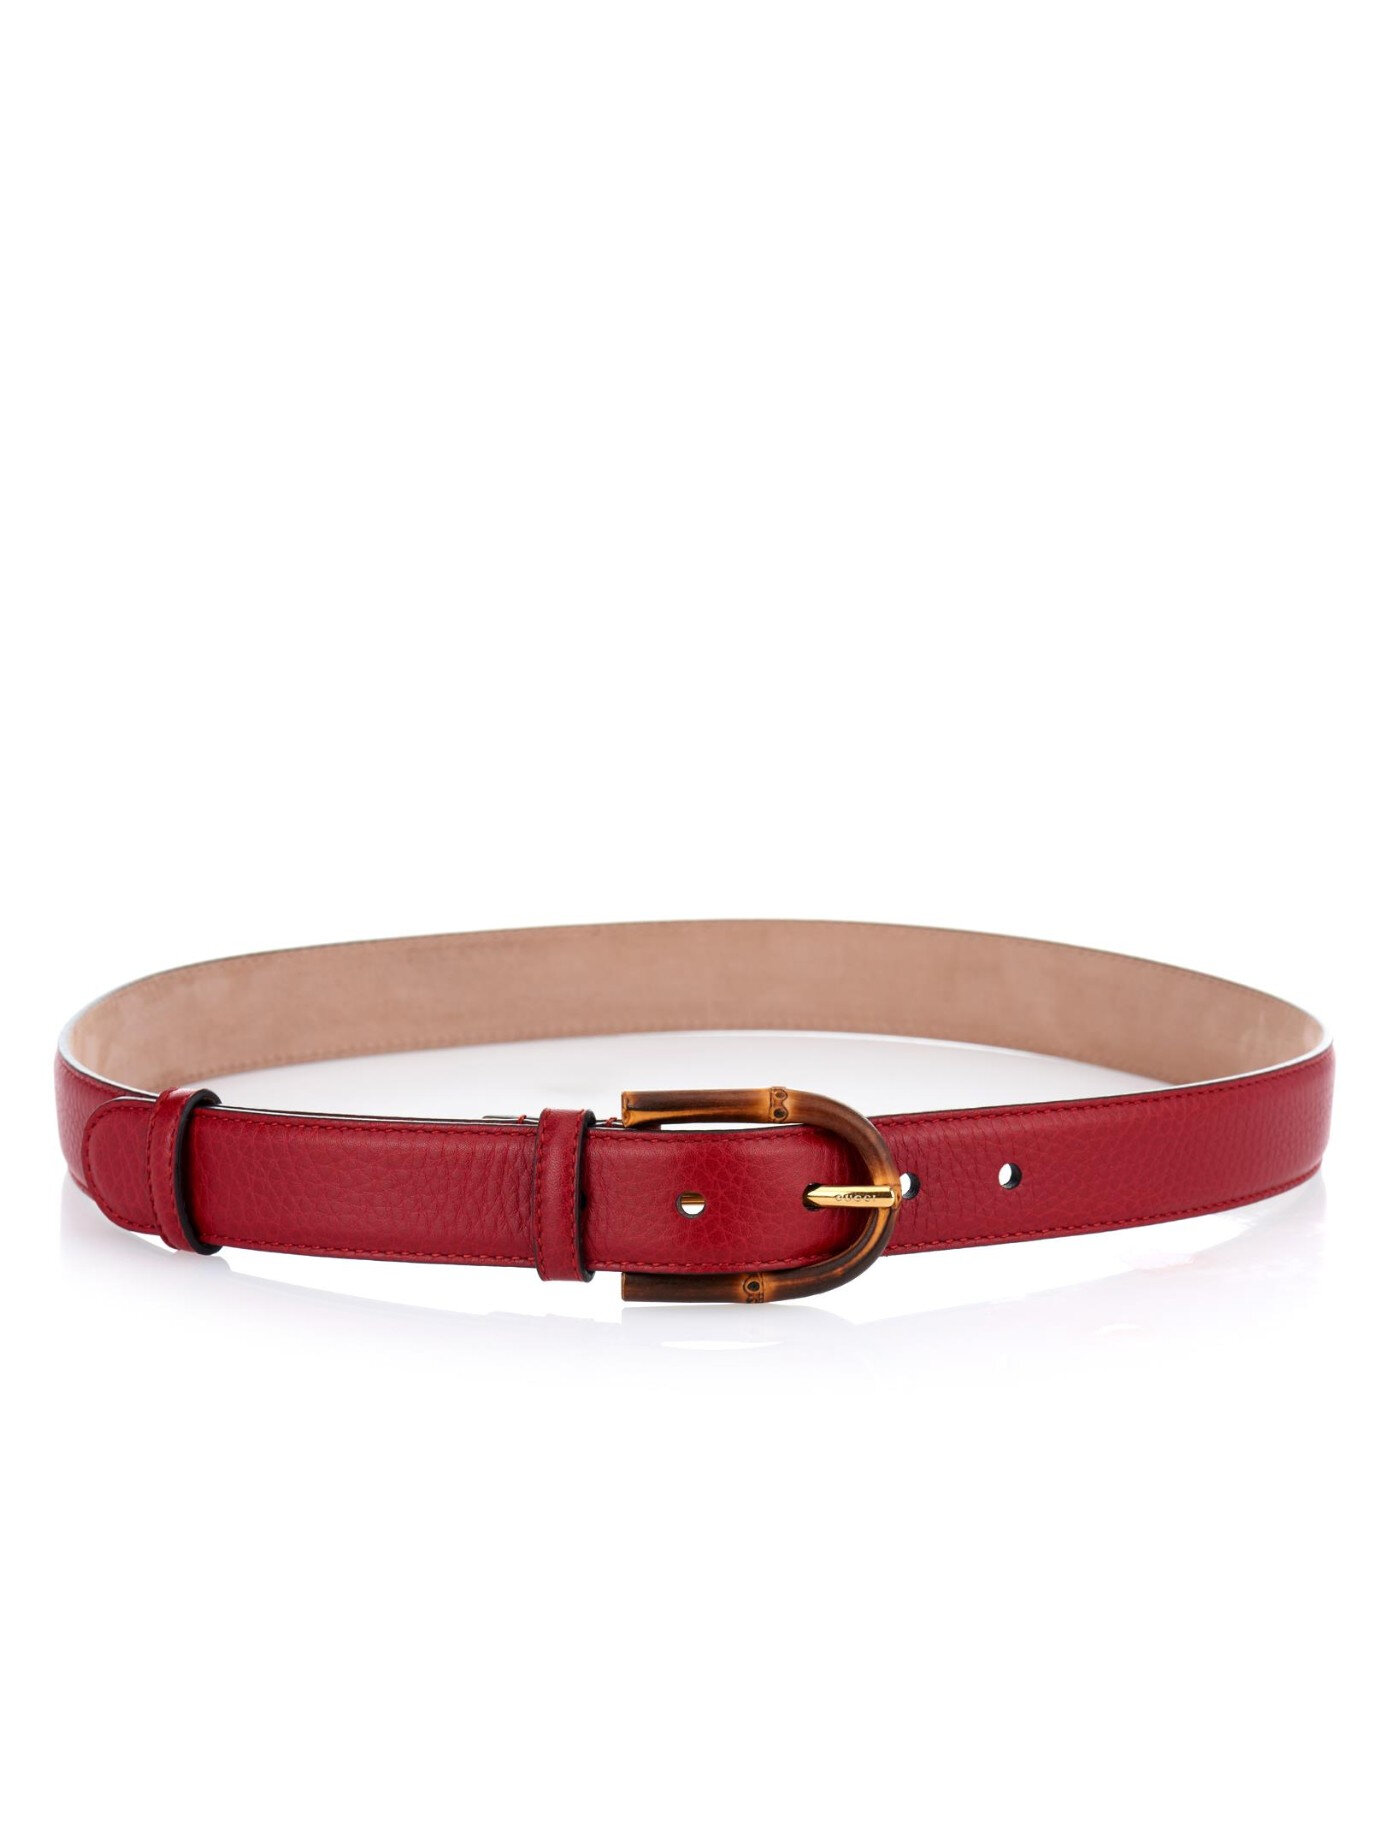 Gucci Bamboo-Buckle Leather Belt in Dark Red.jpg